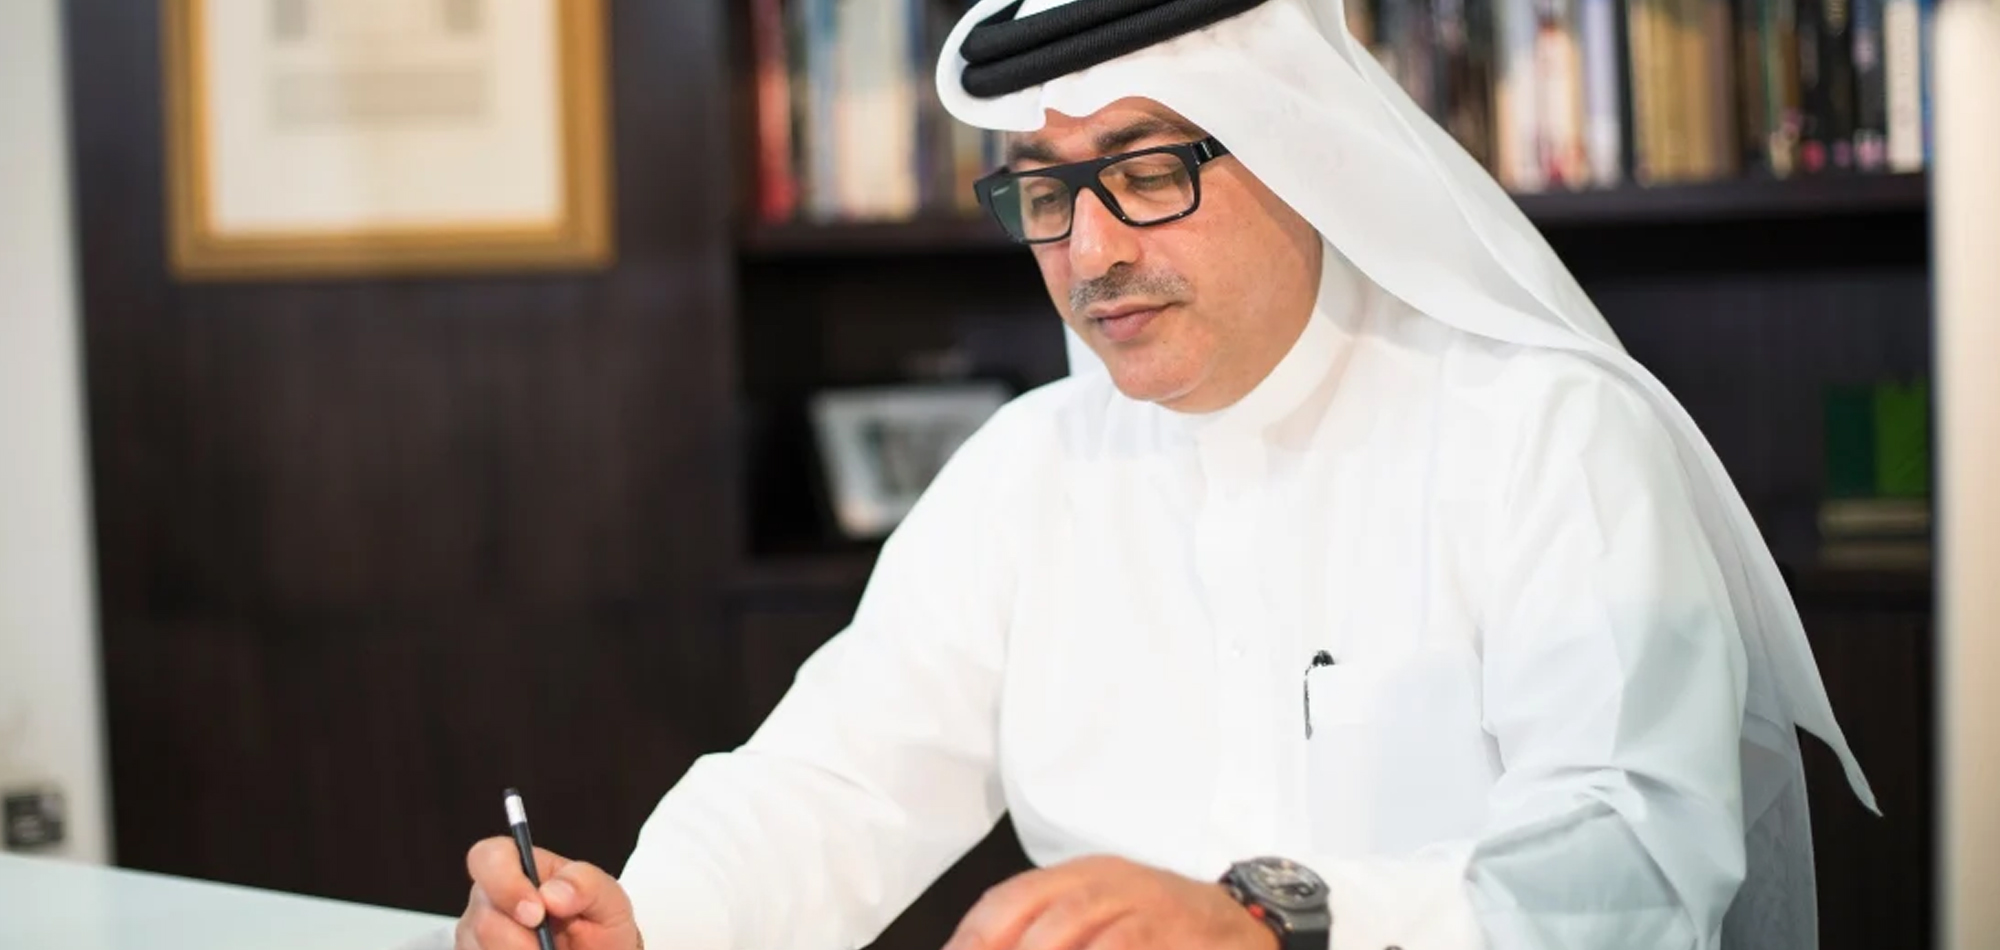 Qatari architect excited to welcome fans to Al Thumama Stadium’s inauguration